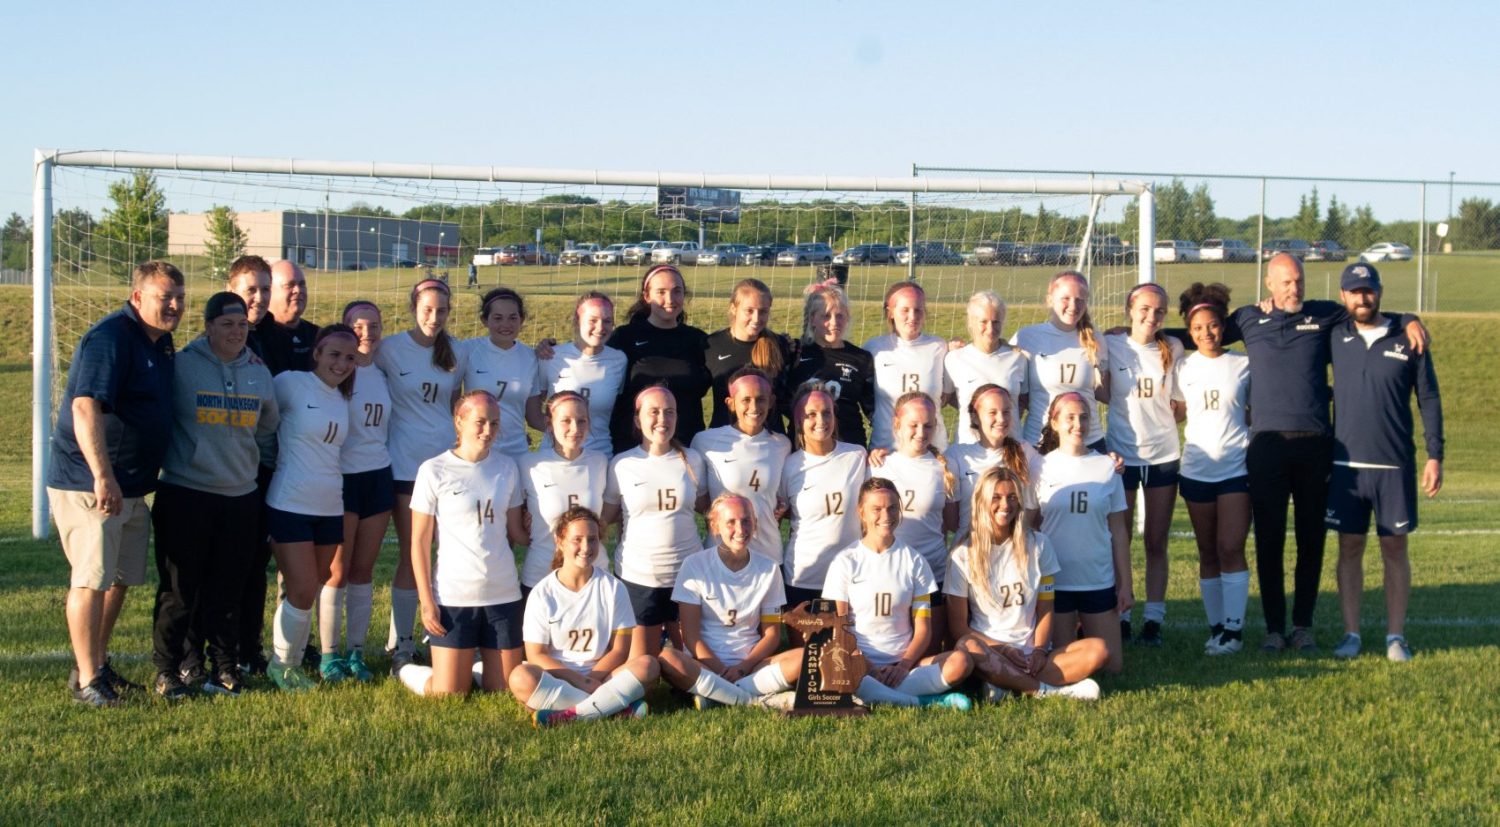 North Muskegon to battle Kalamazoo Christian in Division 4 state soccer semifinal